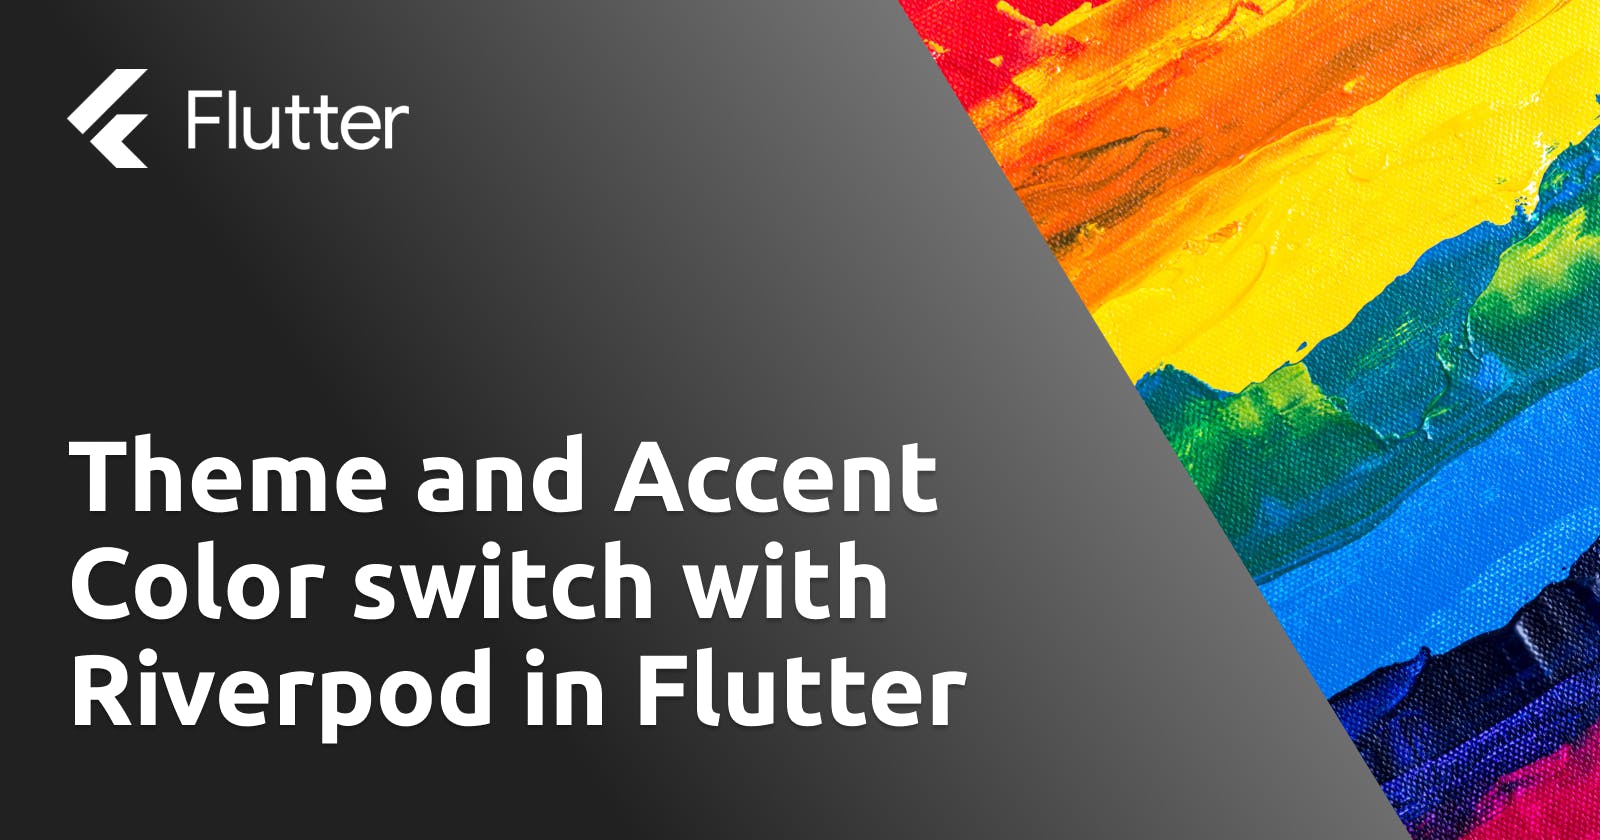 Theme and Accent Color switch with Riverpod in Flutter